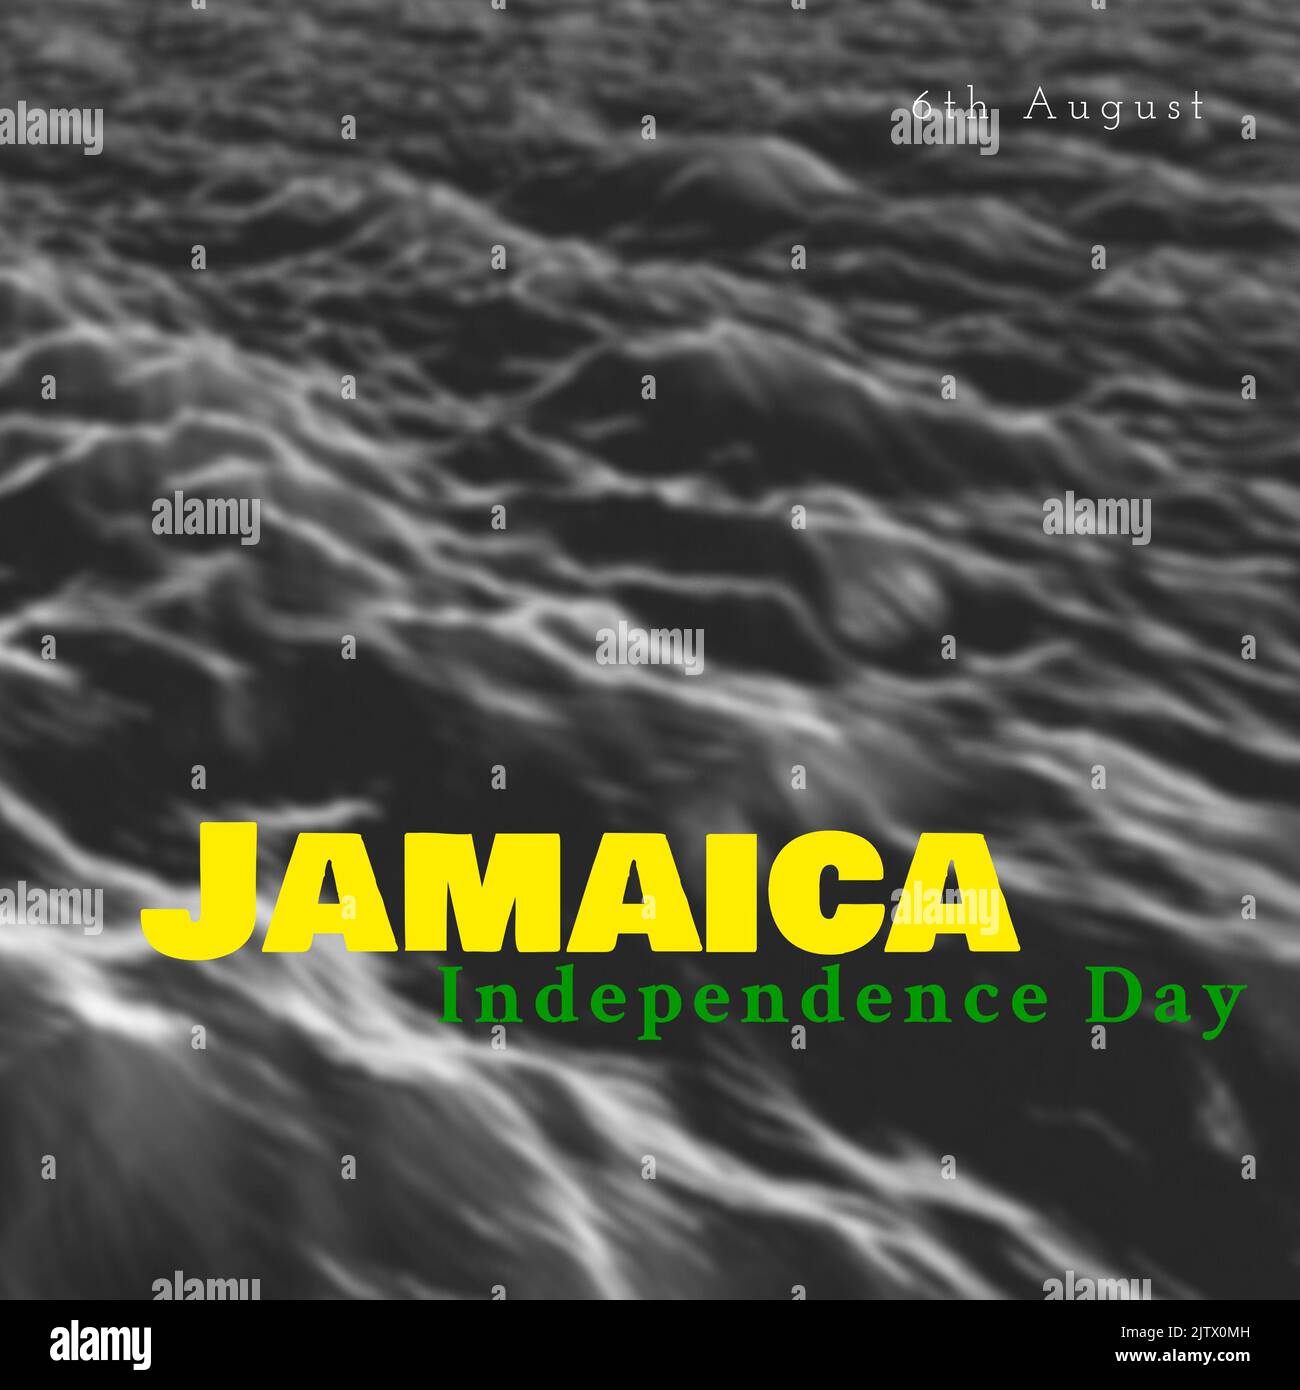 Digital composite of 6th august and jamaica independence day text against waves splashing in sea Stock Photo